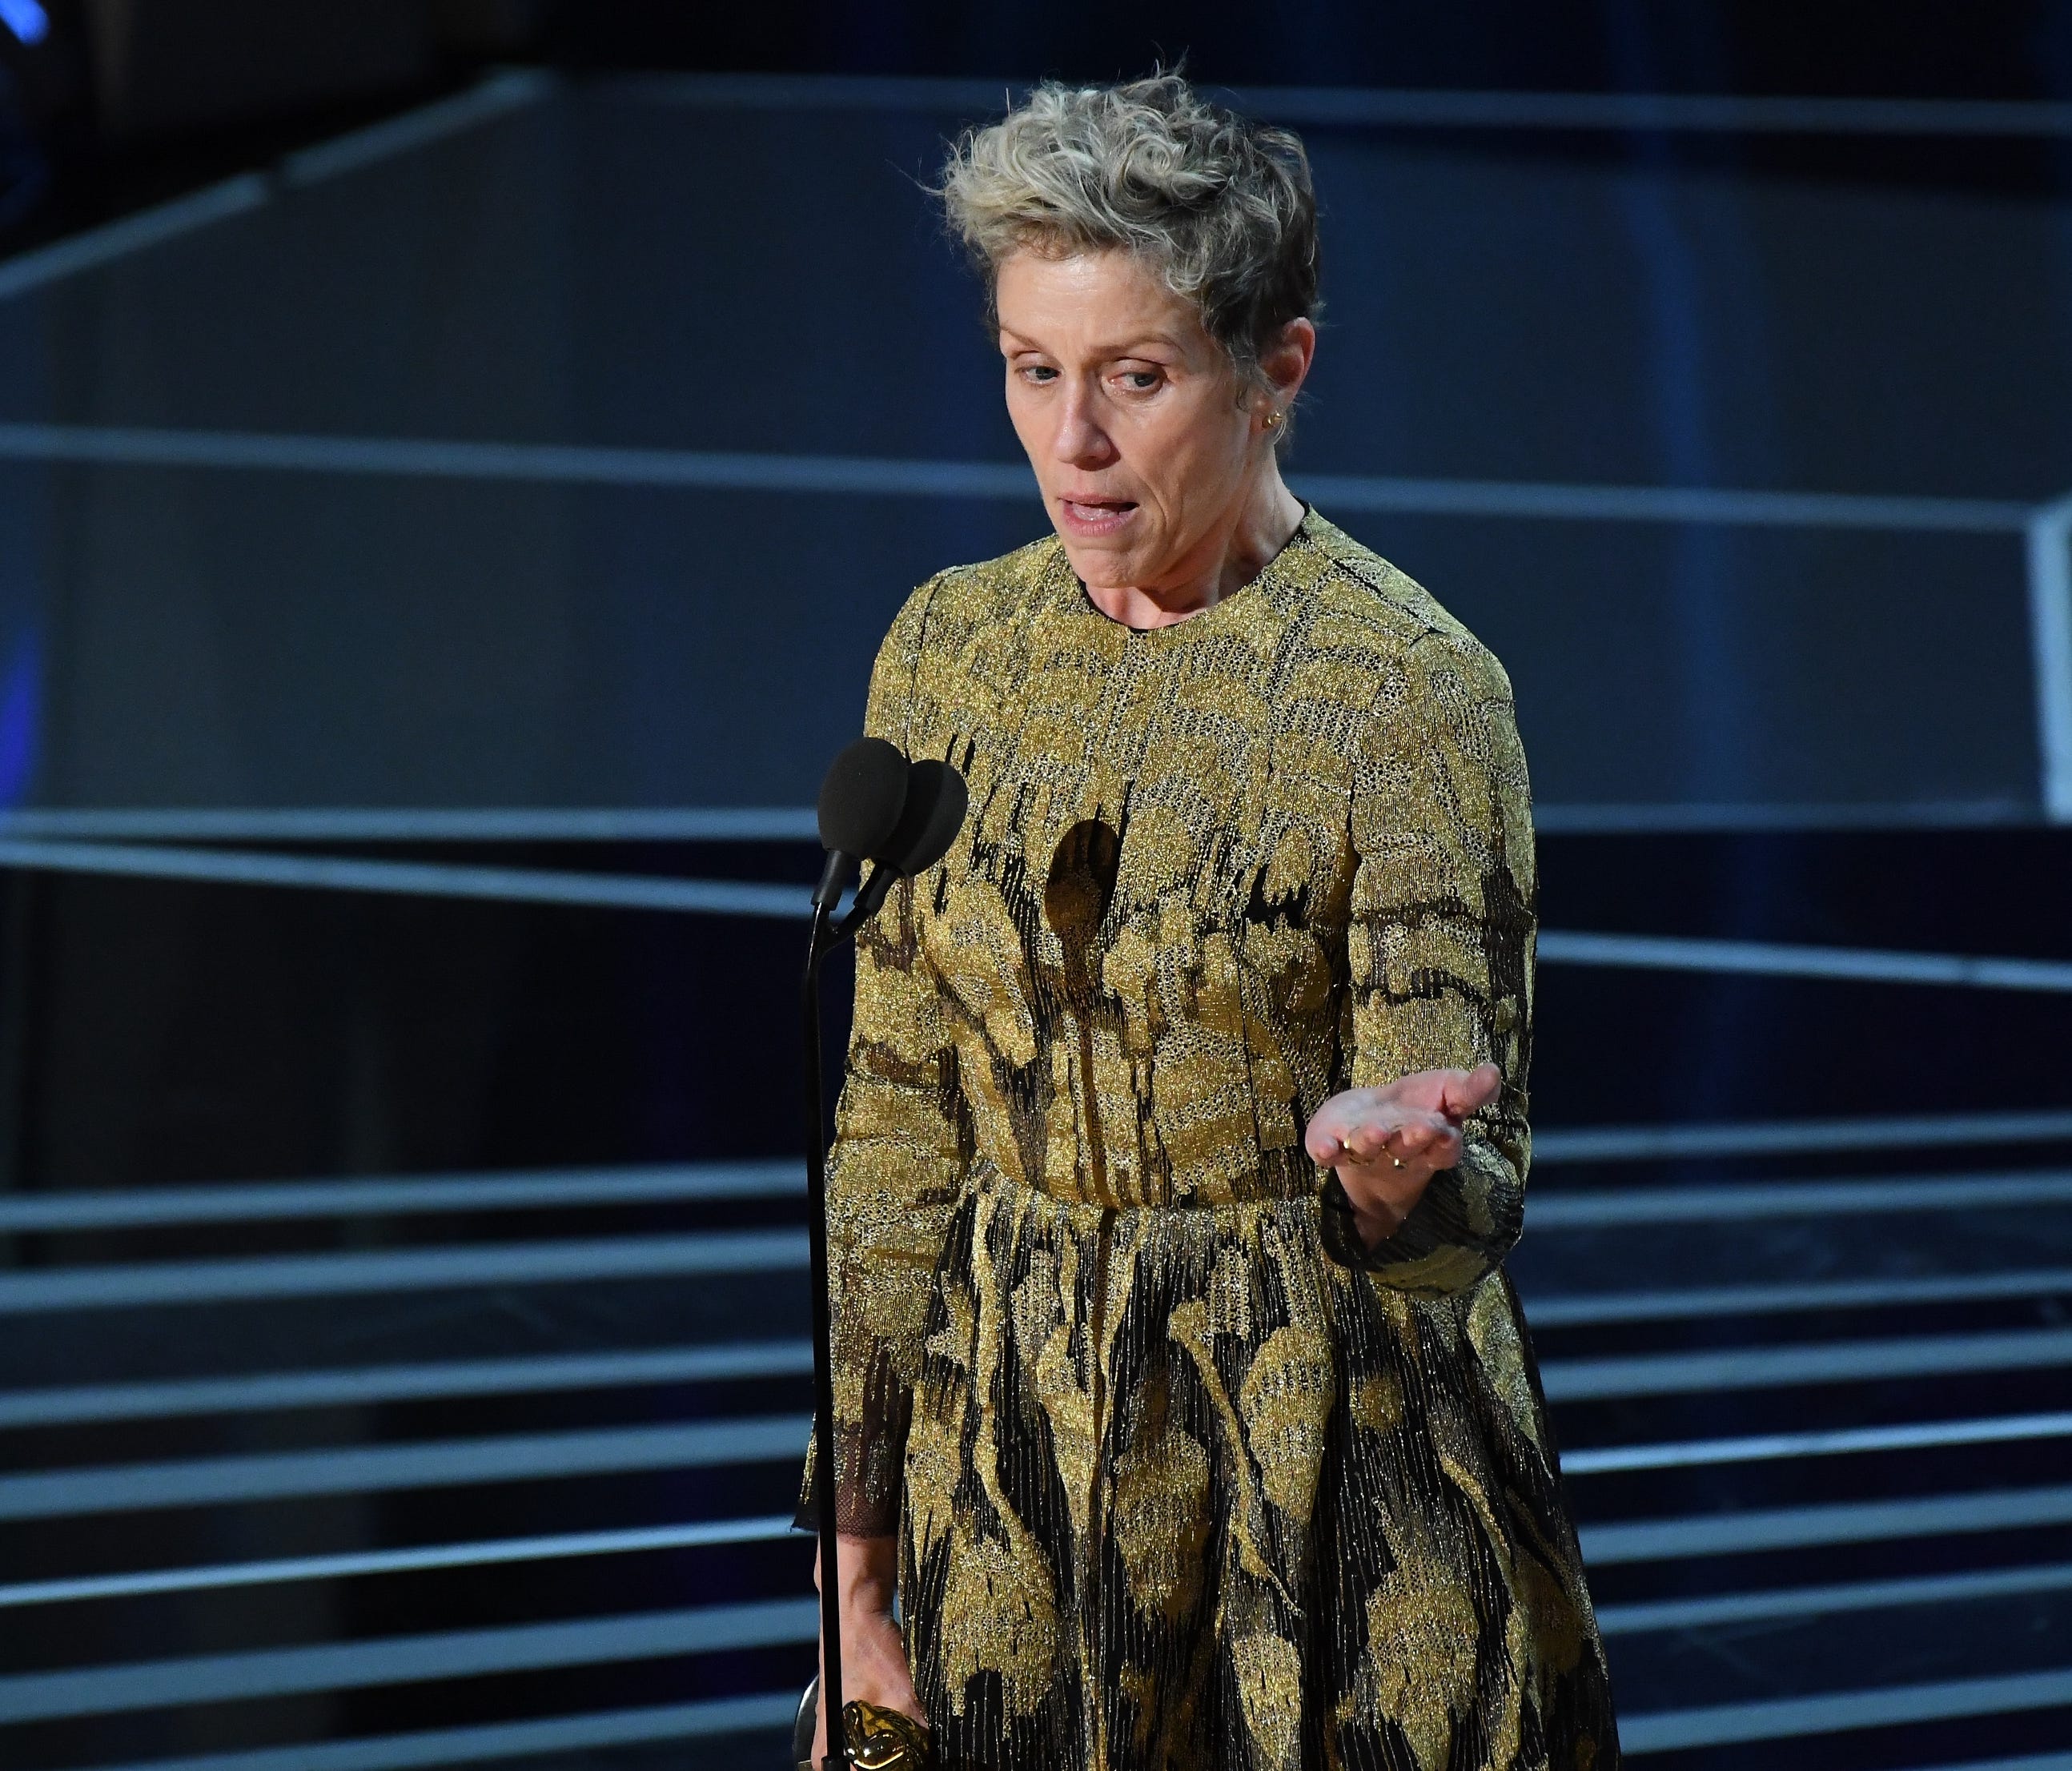 Frances McDormand accepts the Oscar for performance by an actress in a leading role during the Academy Awards on March 4, 2018, in Hollywood.